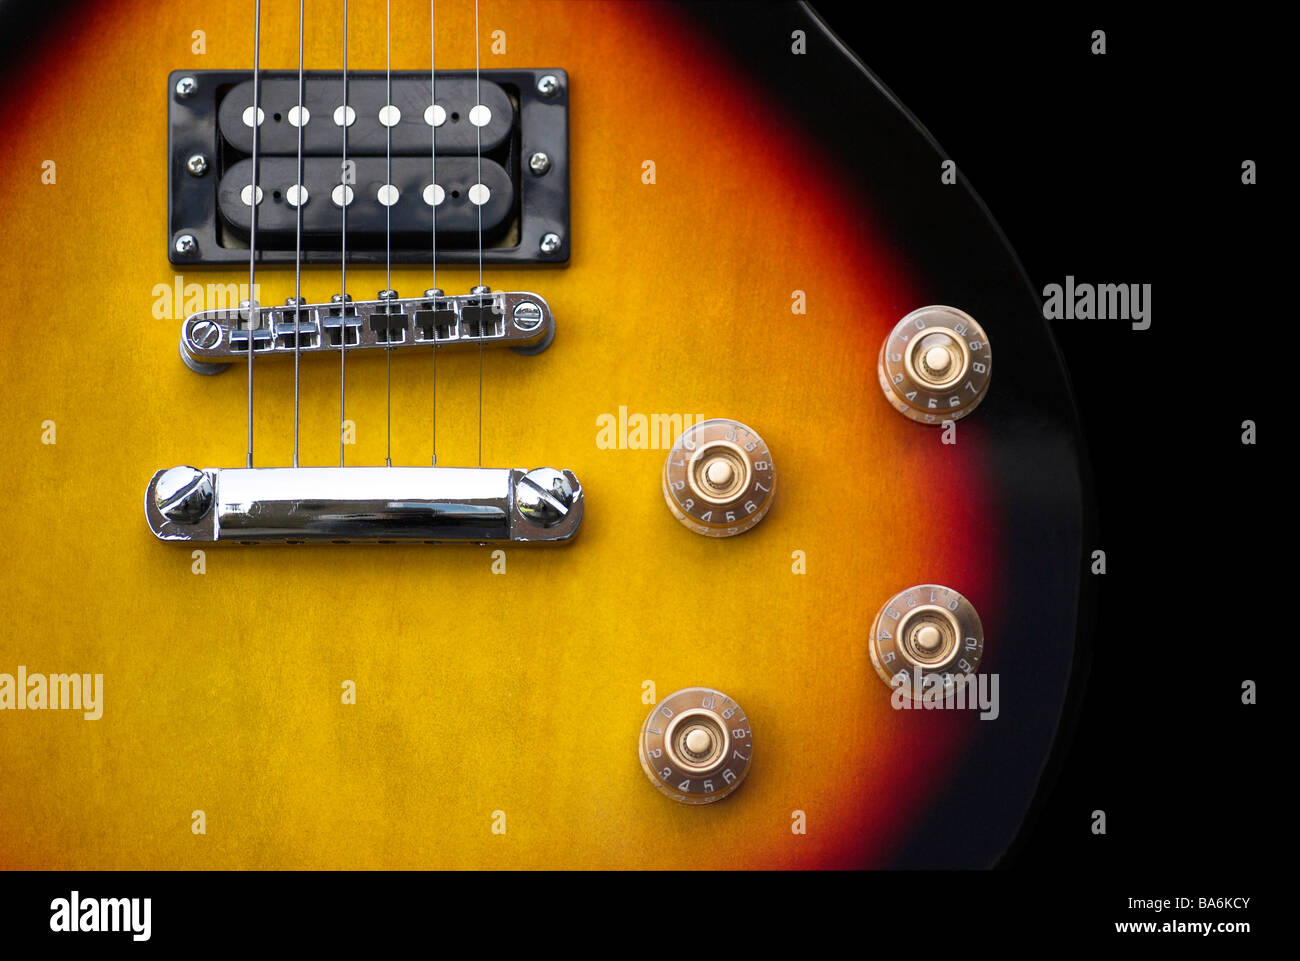 Part of an electric guitar - including strings, pickups, controls Stock Photo